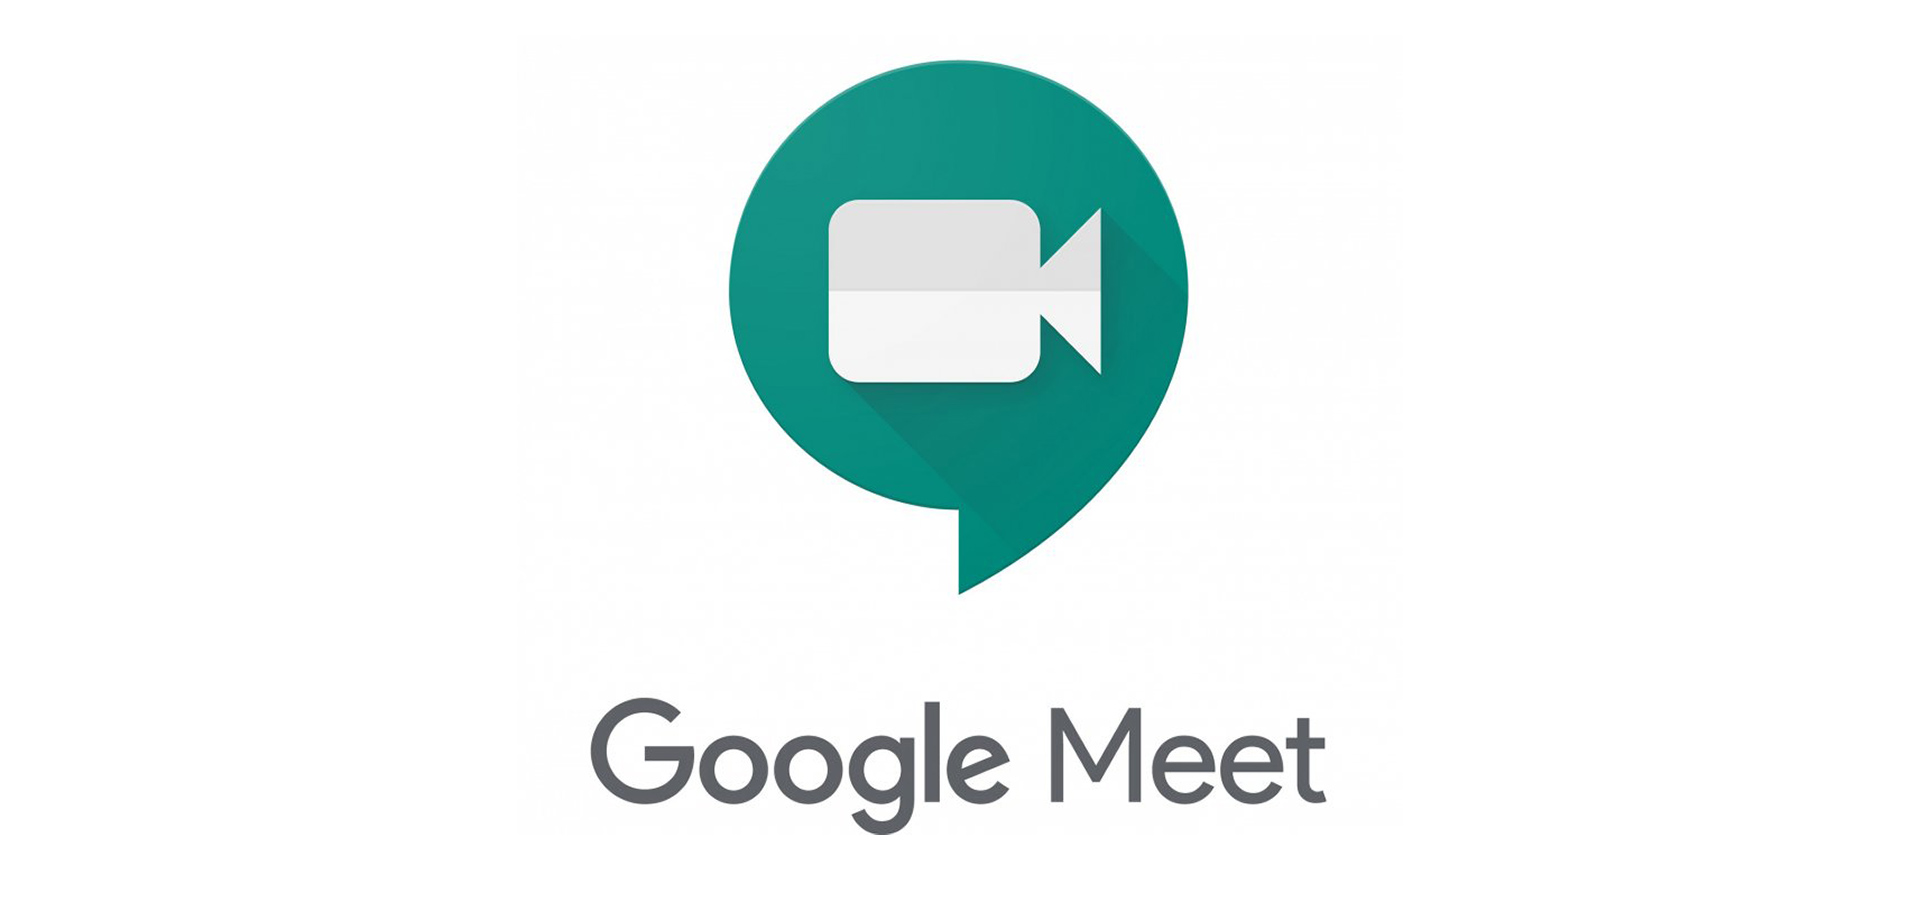 GO ONLINE WITH GOOGLE MEETING post thumbnail